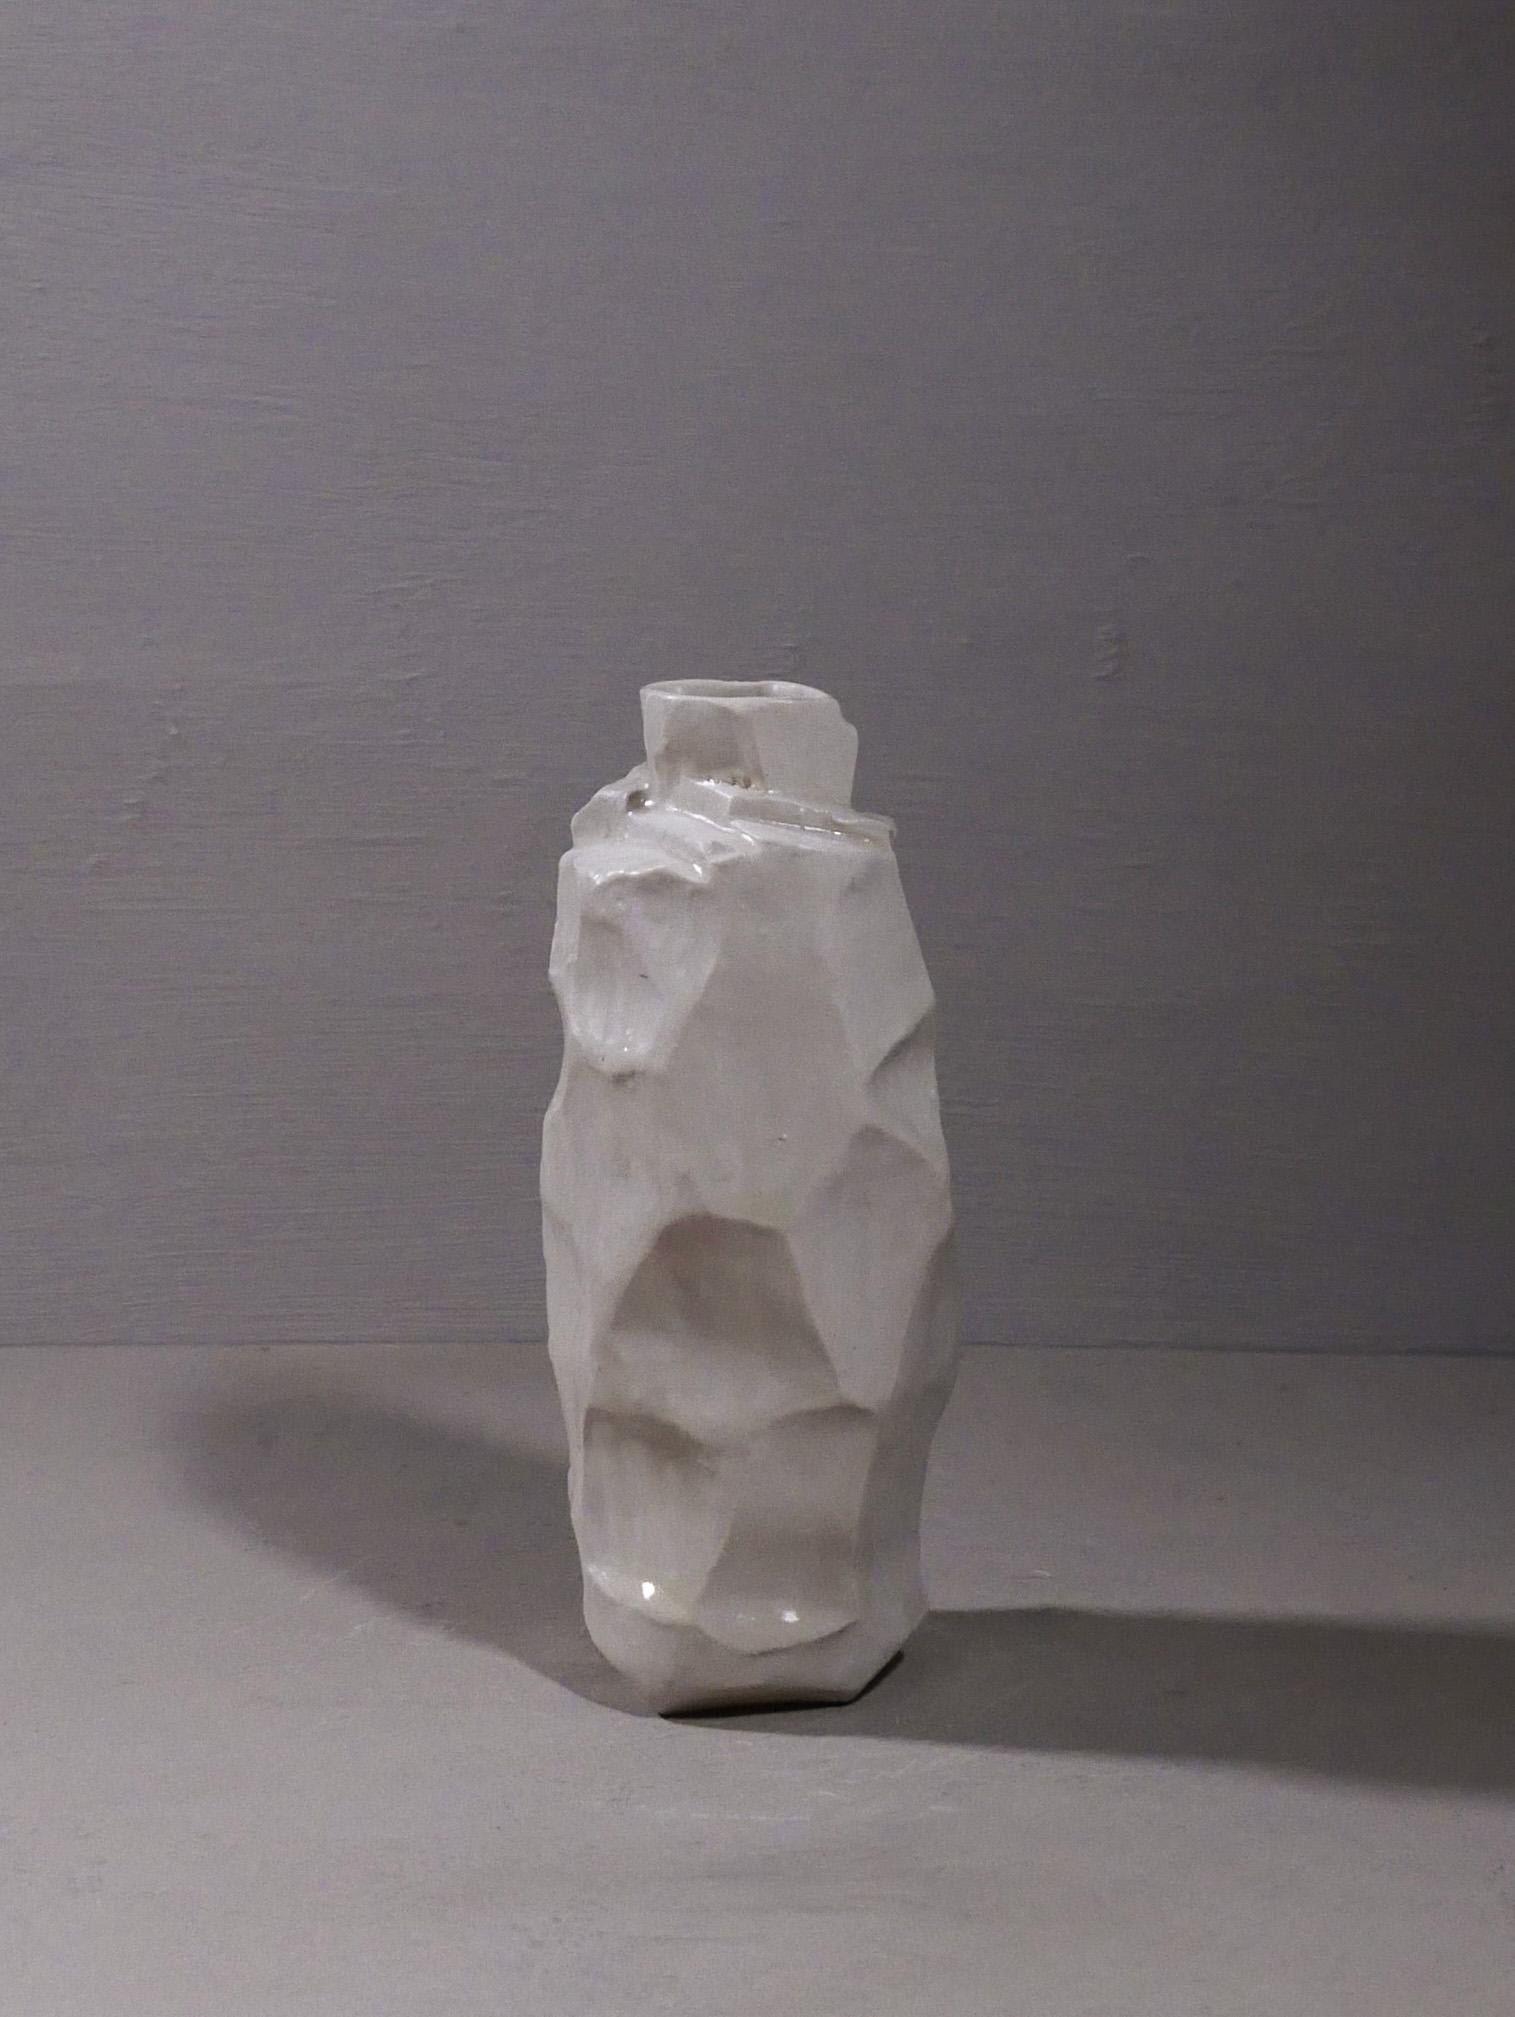 A white porcelain vase finished with matte white glaze by acclaimed artist Judith Solomon. 